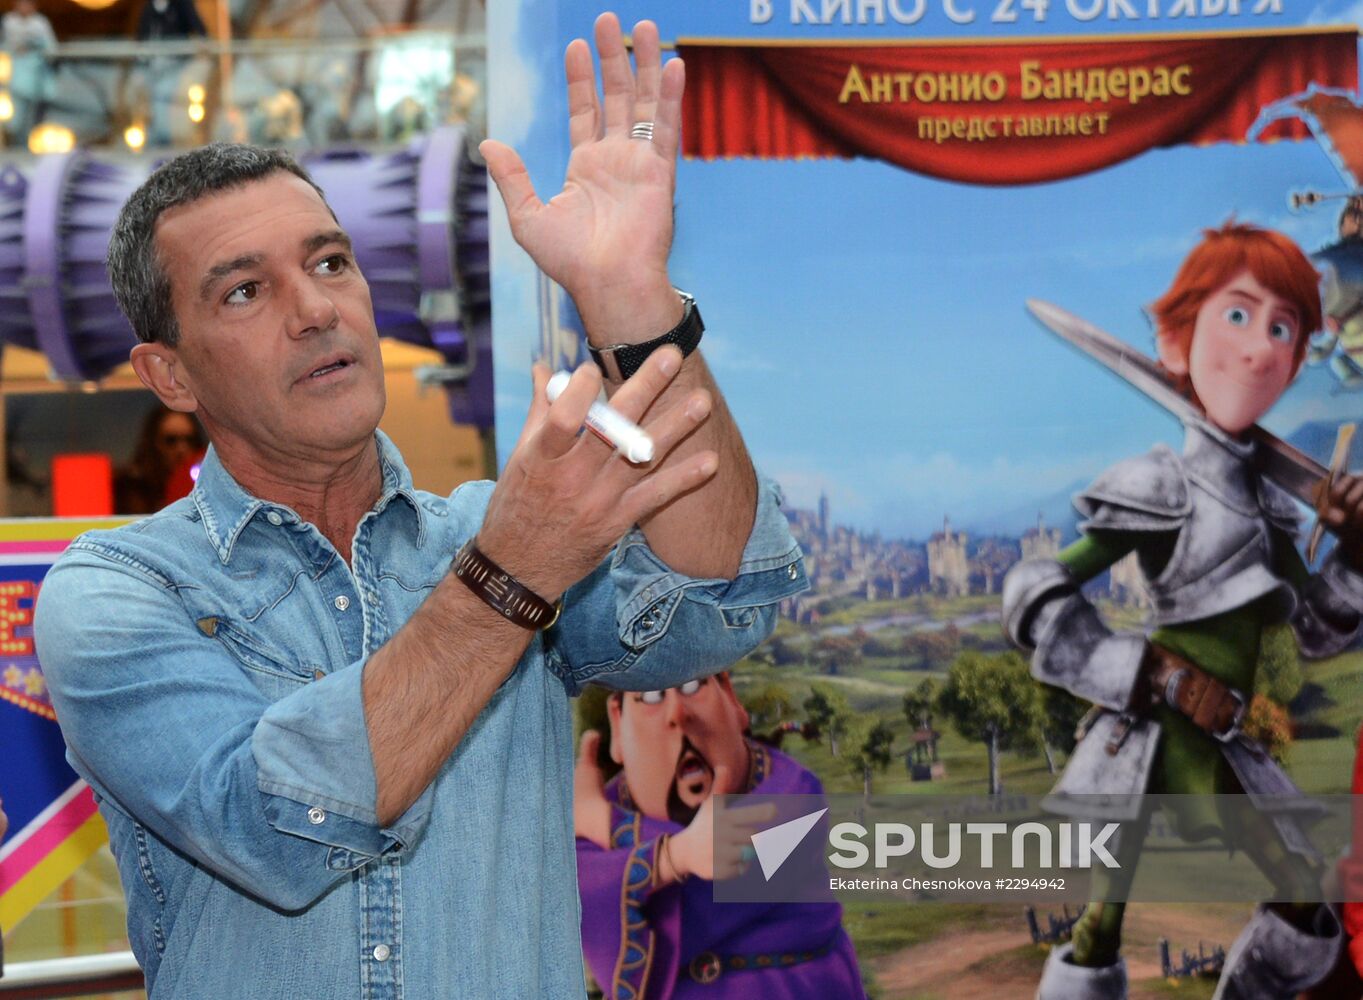 Antonio Banderas gets star of fame at Vegas in Moscow